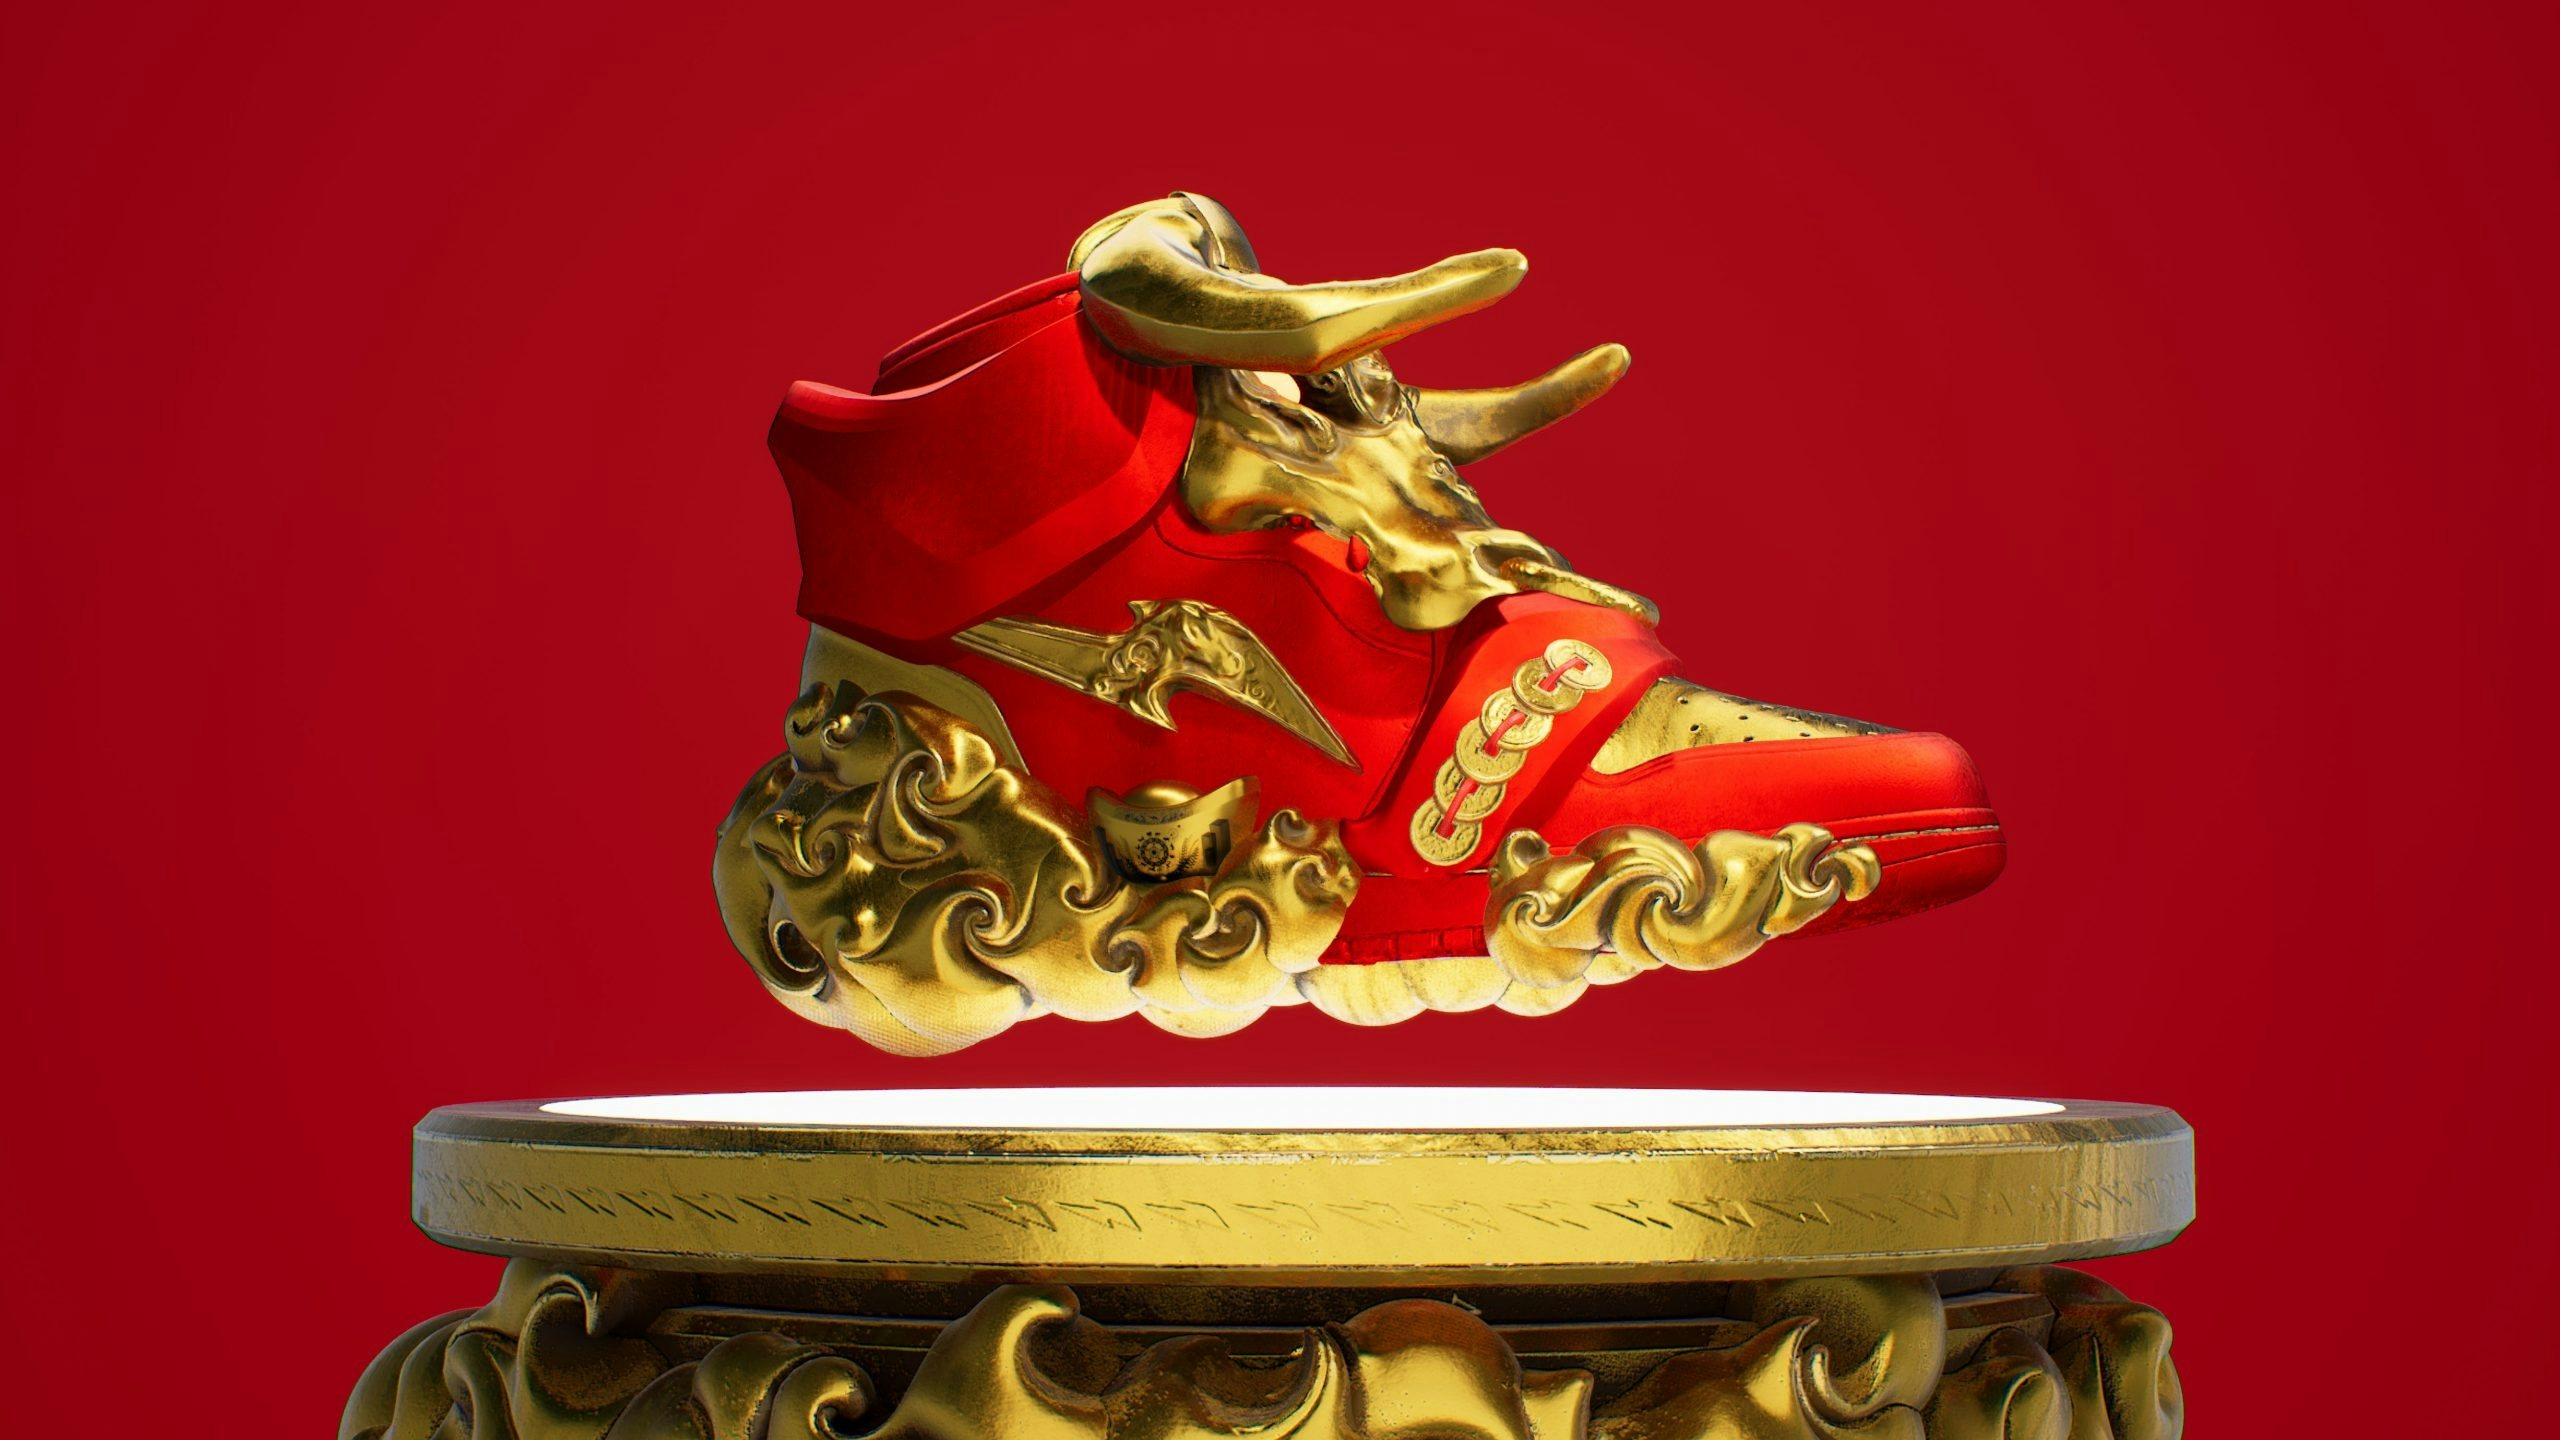 RTFKT’s sneaker drop with FEWOCiOUS earned three million. Now, it’s auctioned off a gold sneaker for Chinese New Year on China’s digital marketplace, Treasureland. Photo: Courtesy 